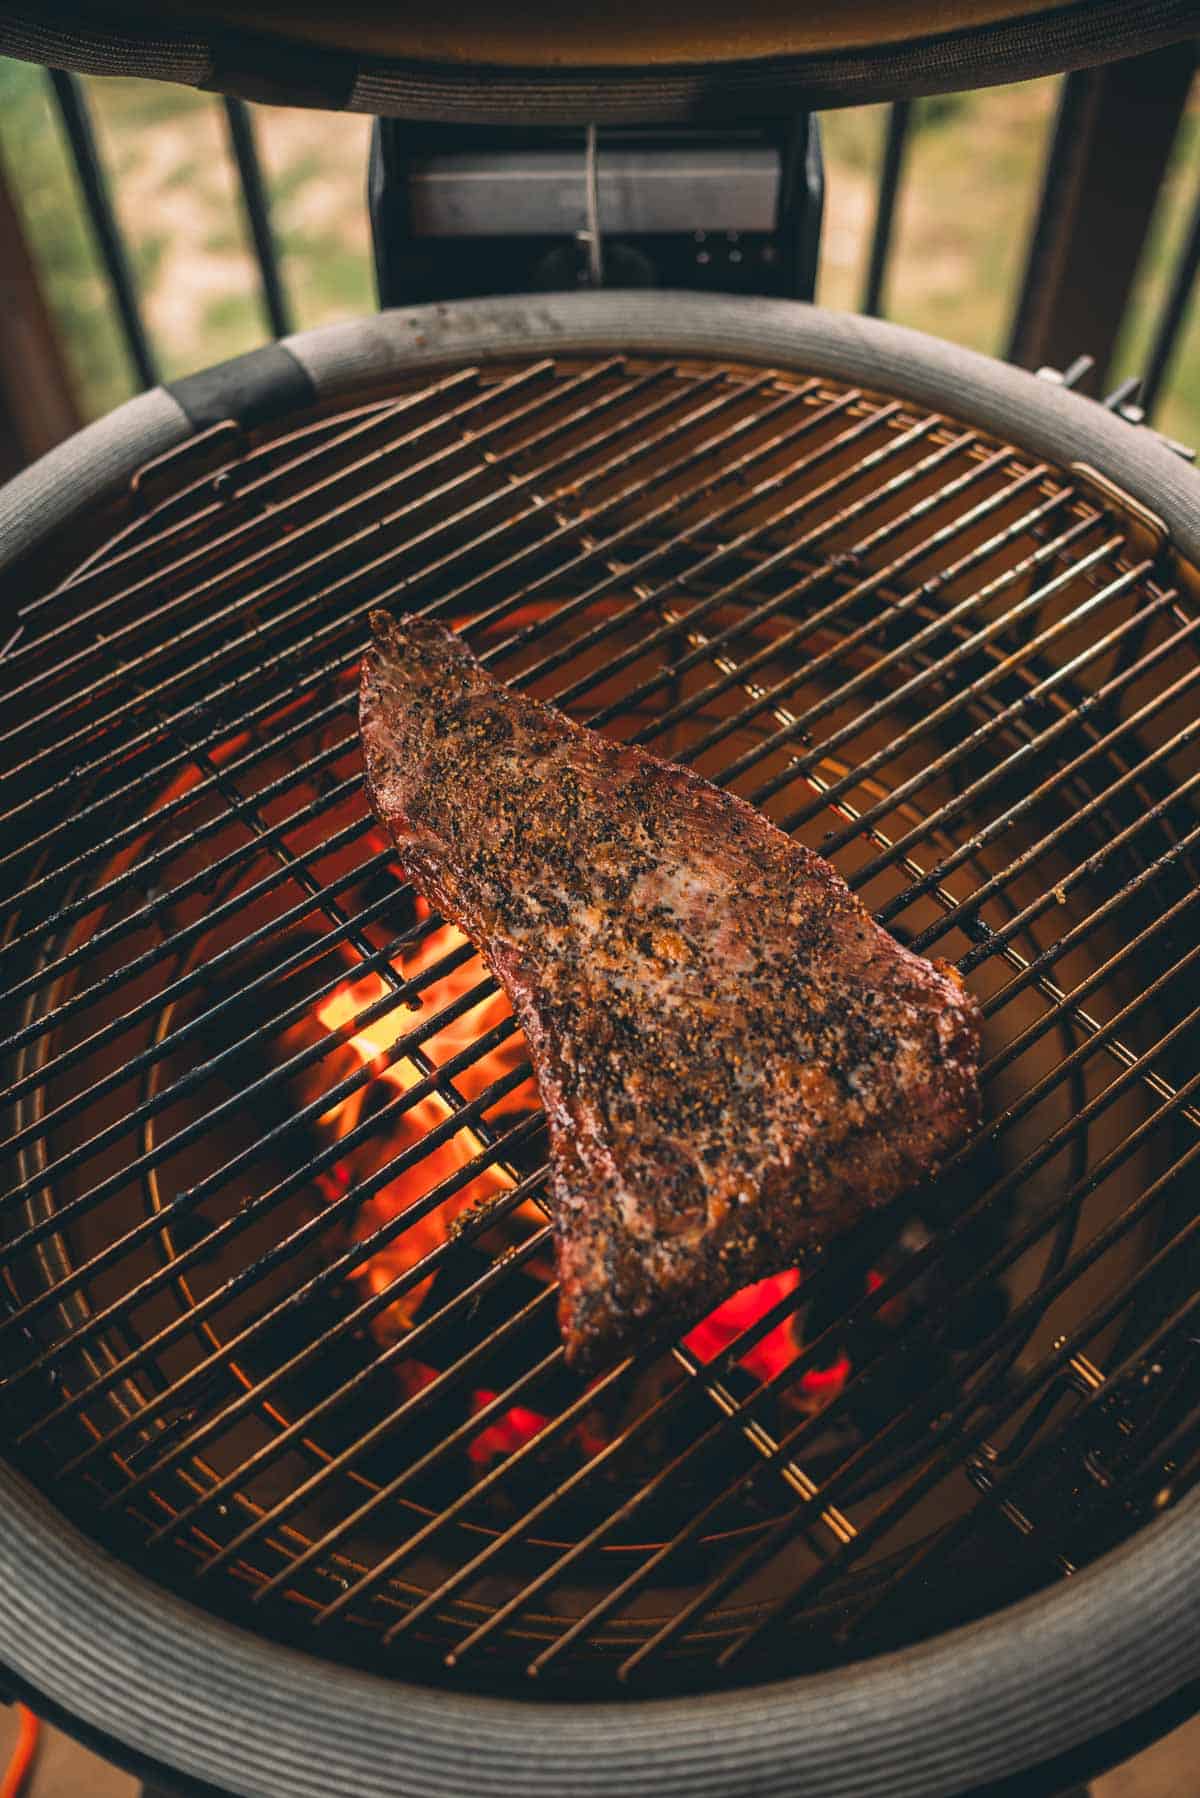 A tri-tip searing on a barbecue with visible flames and coals underneath.